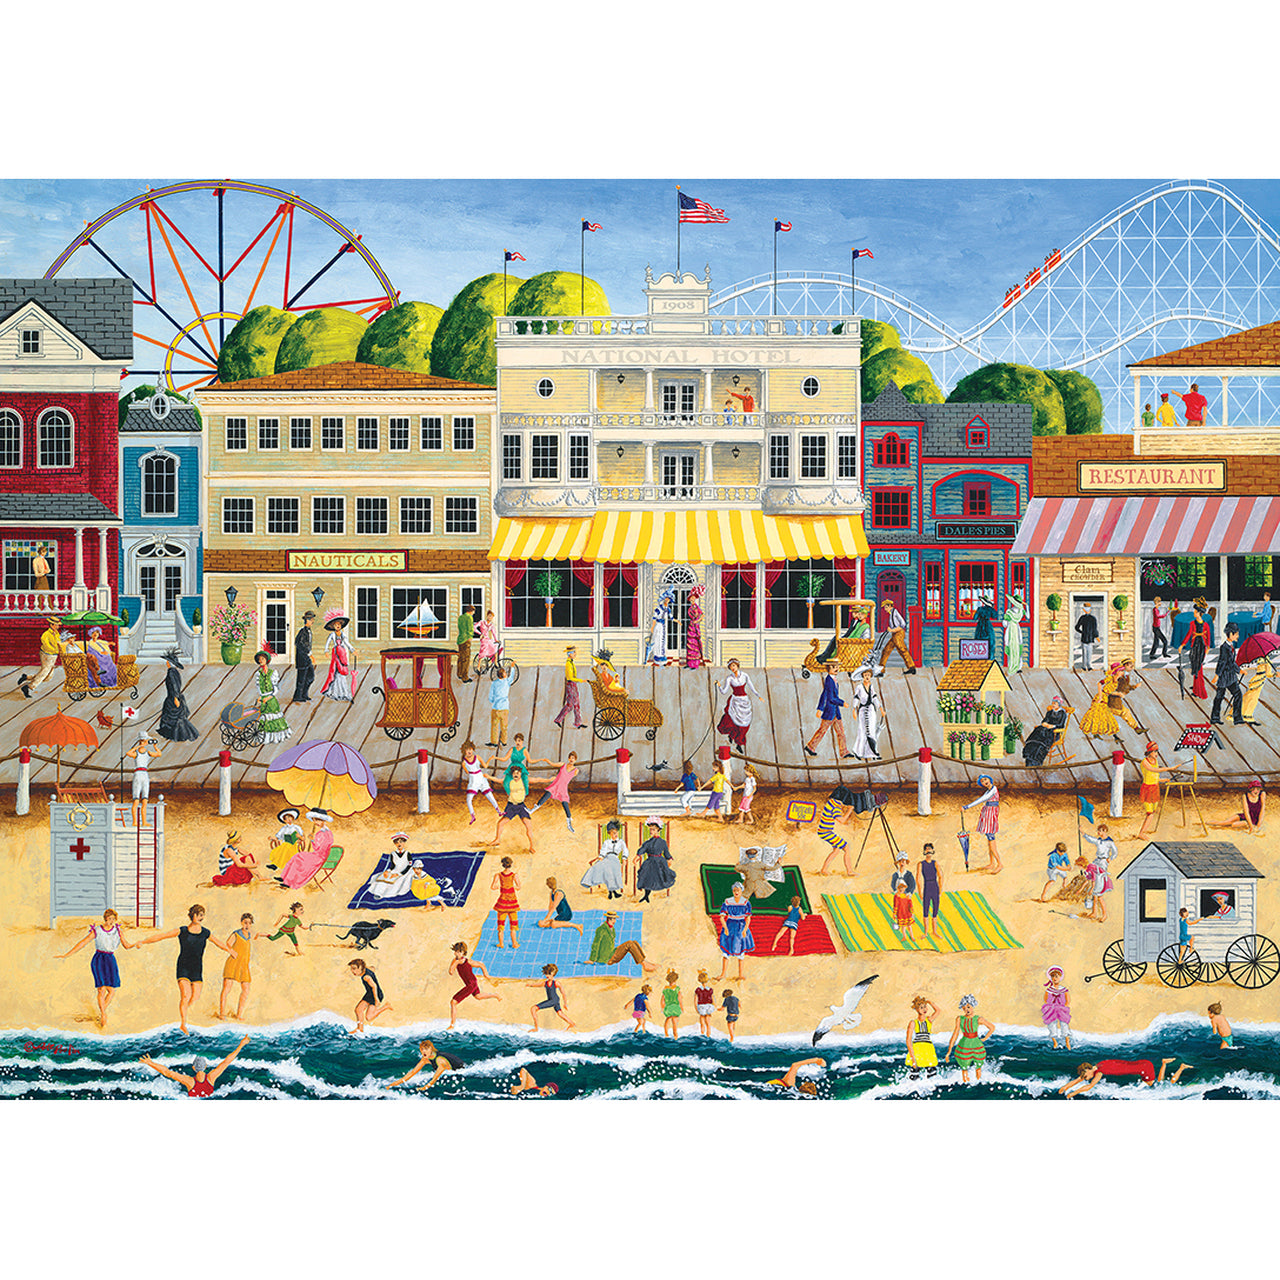 Hometown Gallery - On the Boardwalk 1000 Piece Jigsaw Puzzle by Masterpieces